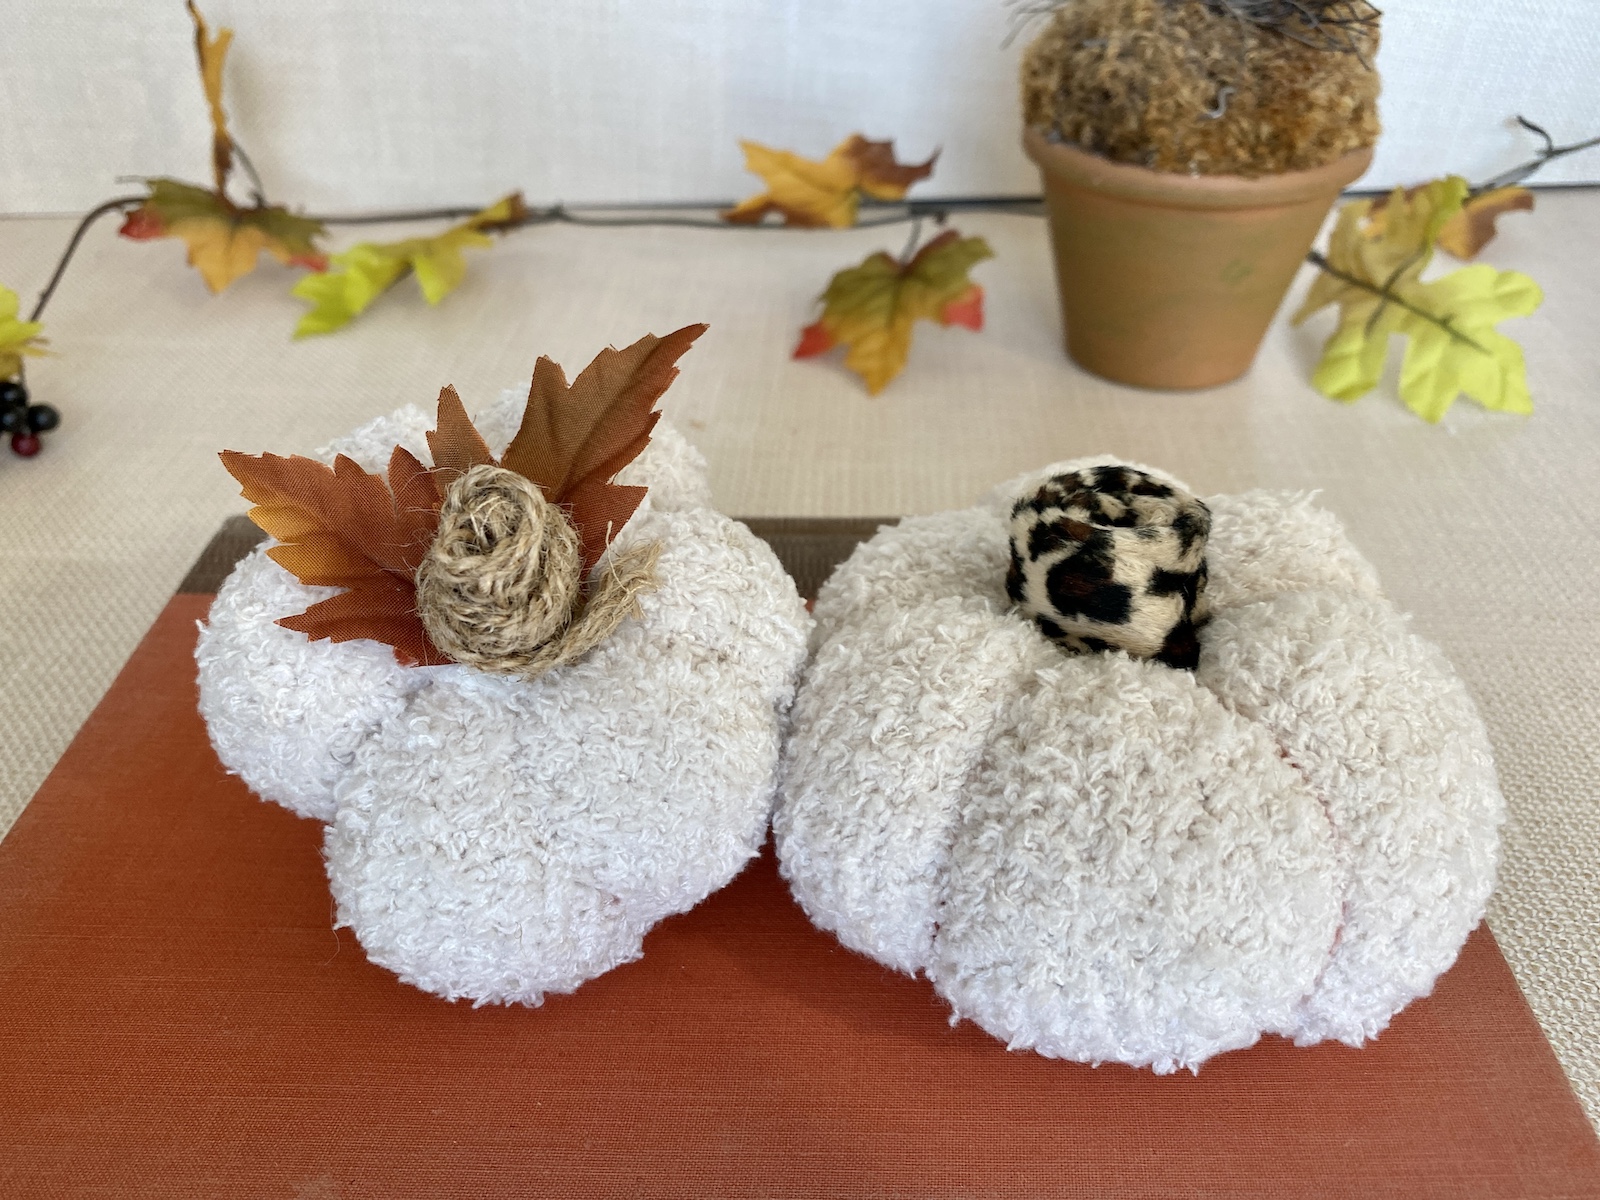 How To Make Sock Pumpkins The Easy Way